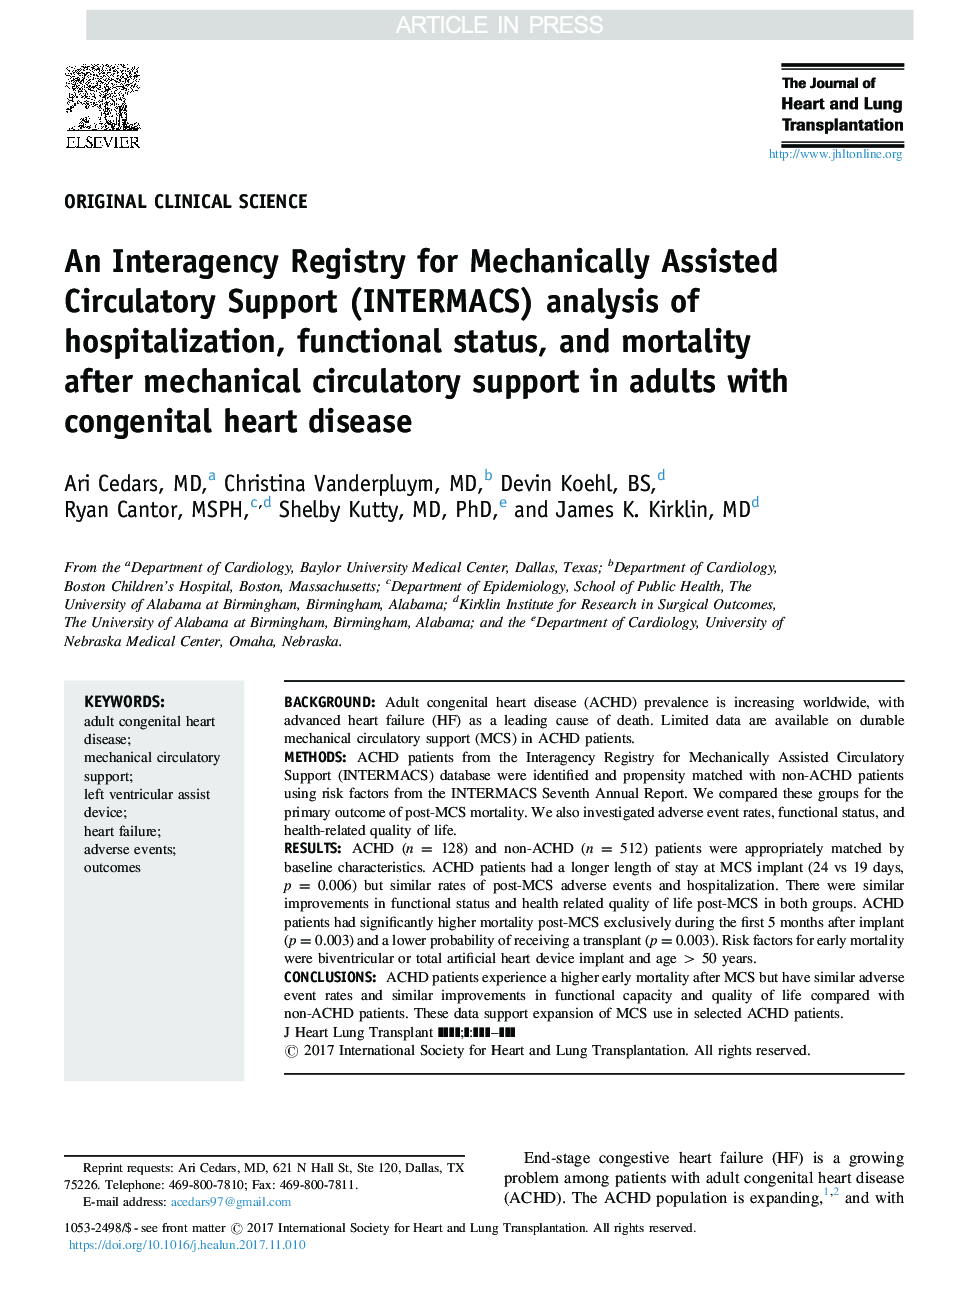 An Interagency Registry for Mechanically Assisted Circulatory Support (INTERMACS) analysis of hospitalization, functional status, and mortality after mechanical circulatory support in adults with congenital heart disease